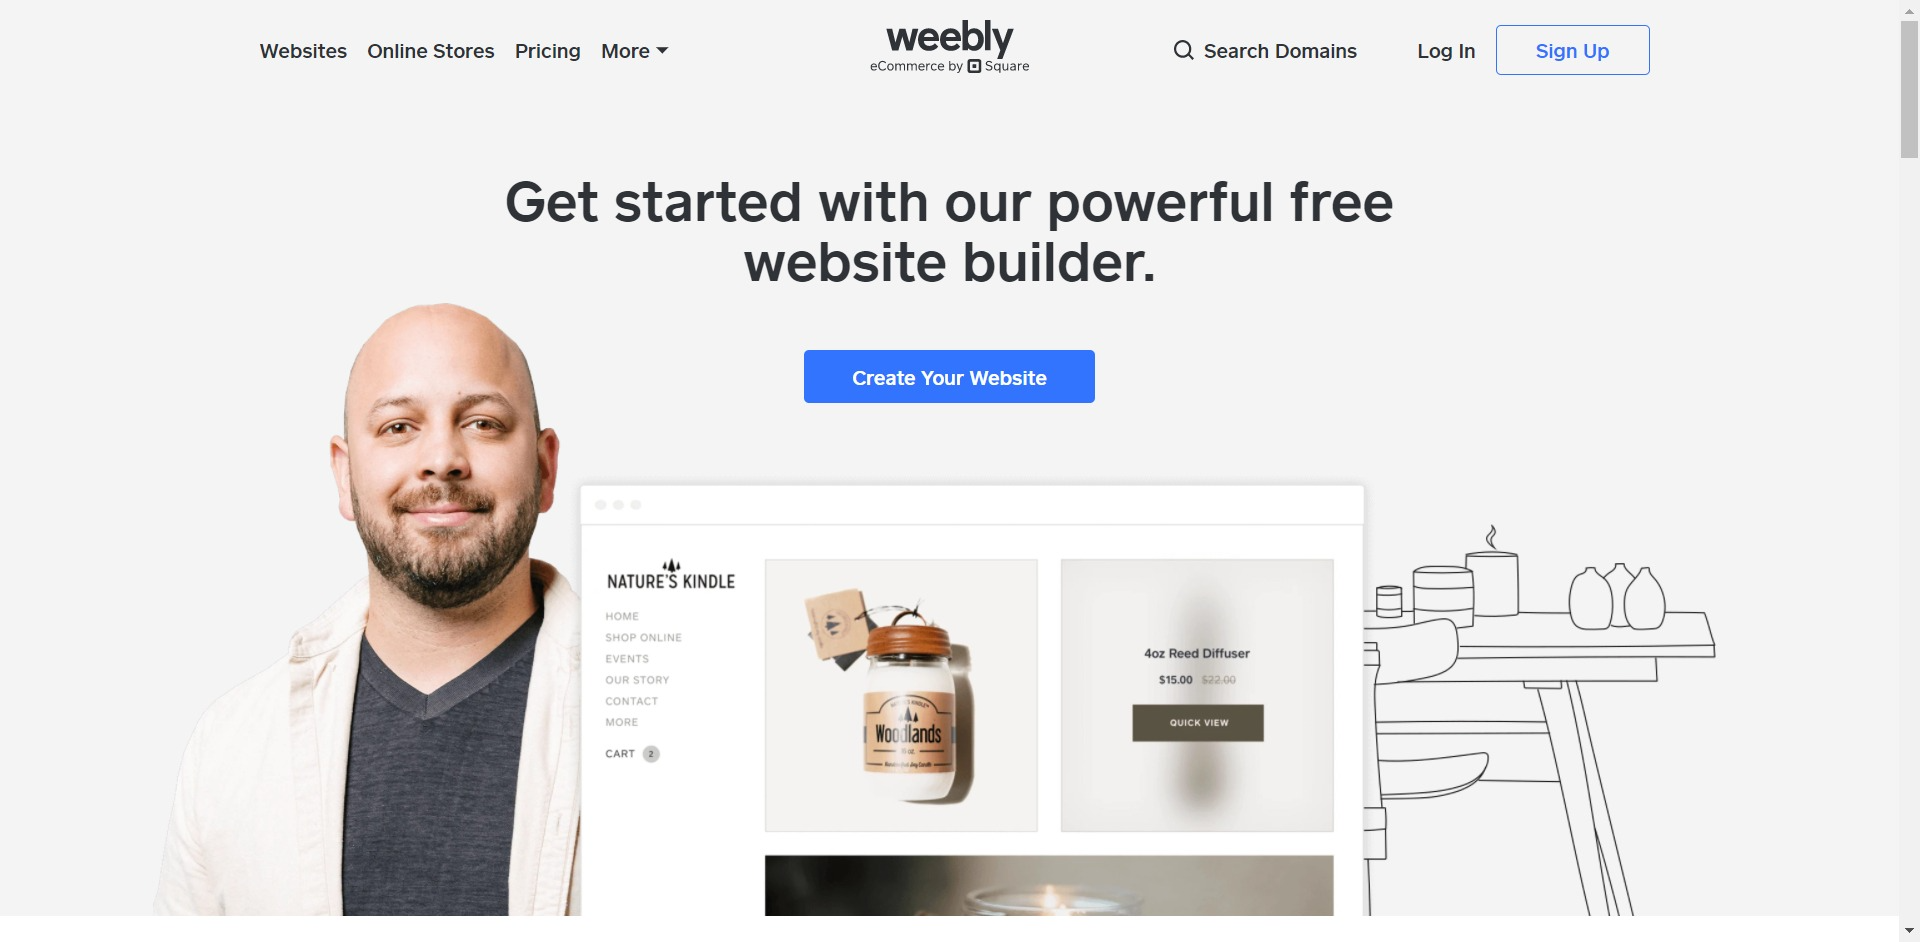 Weebly home page